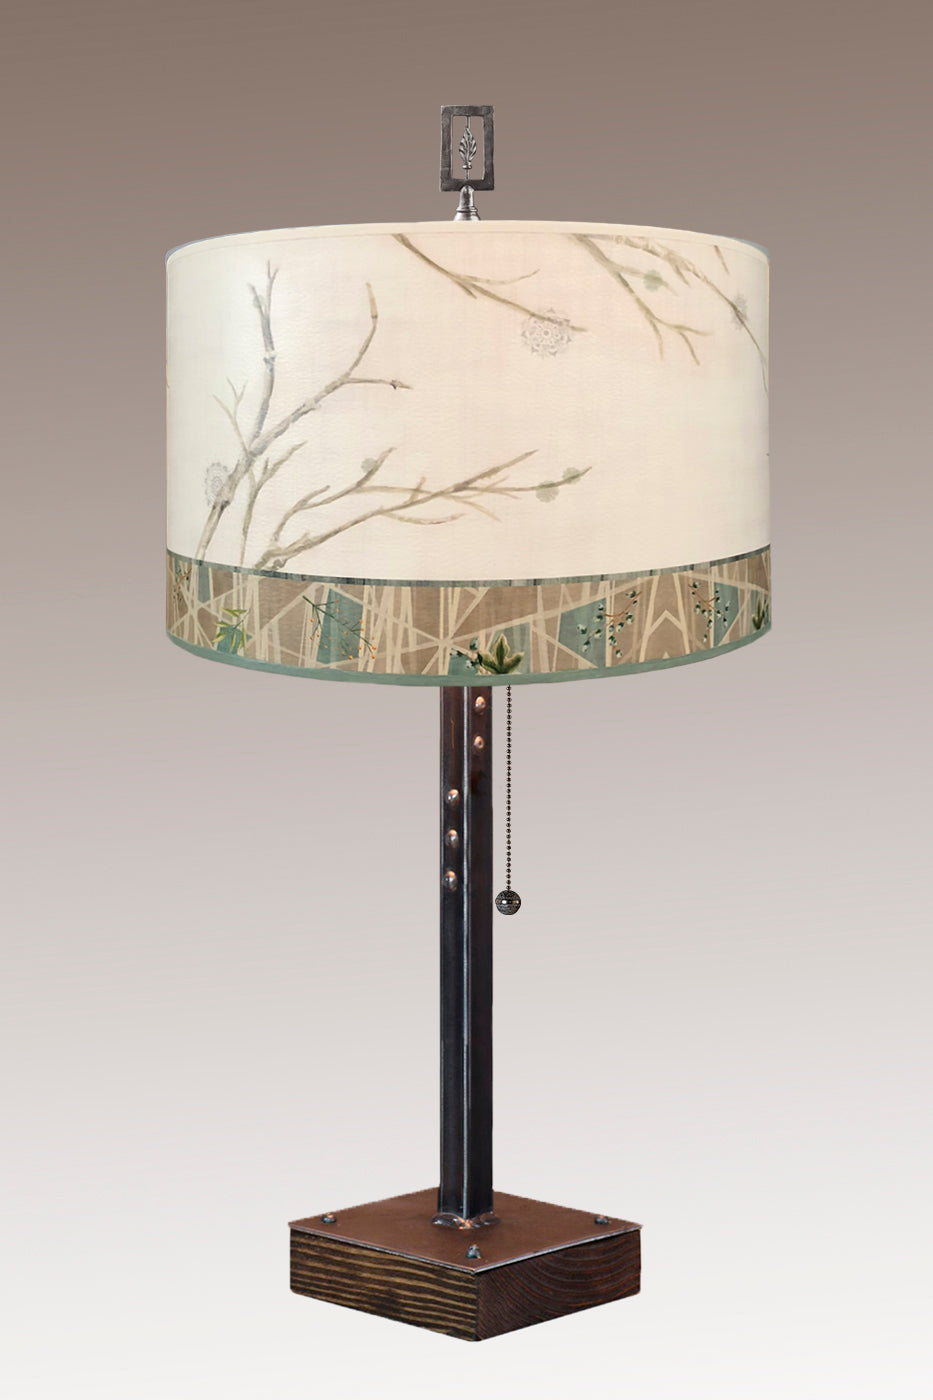 Janna Ugone & Co Table Lamps Steel Table Lamp on Wood with Large Drum Shade in Prism Branch